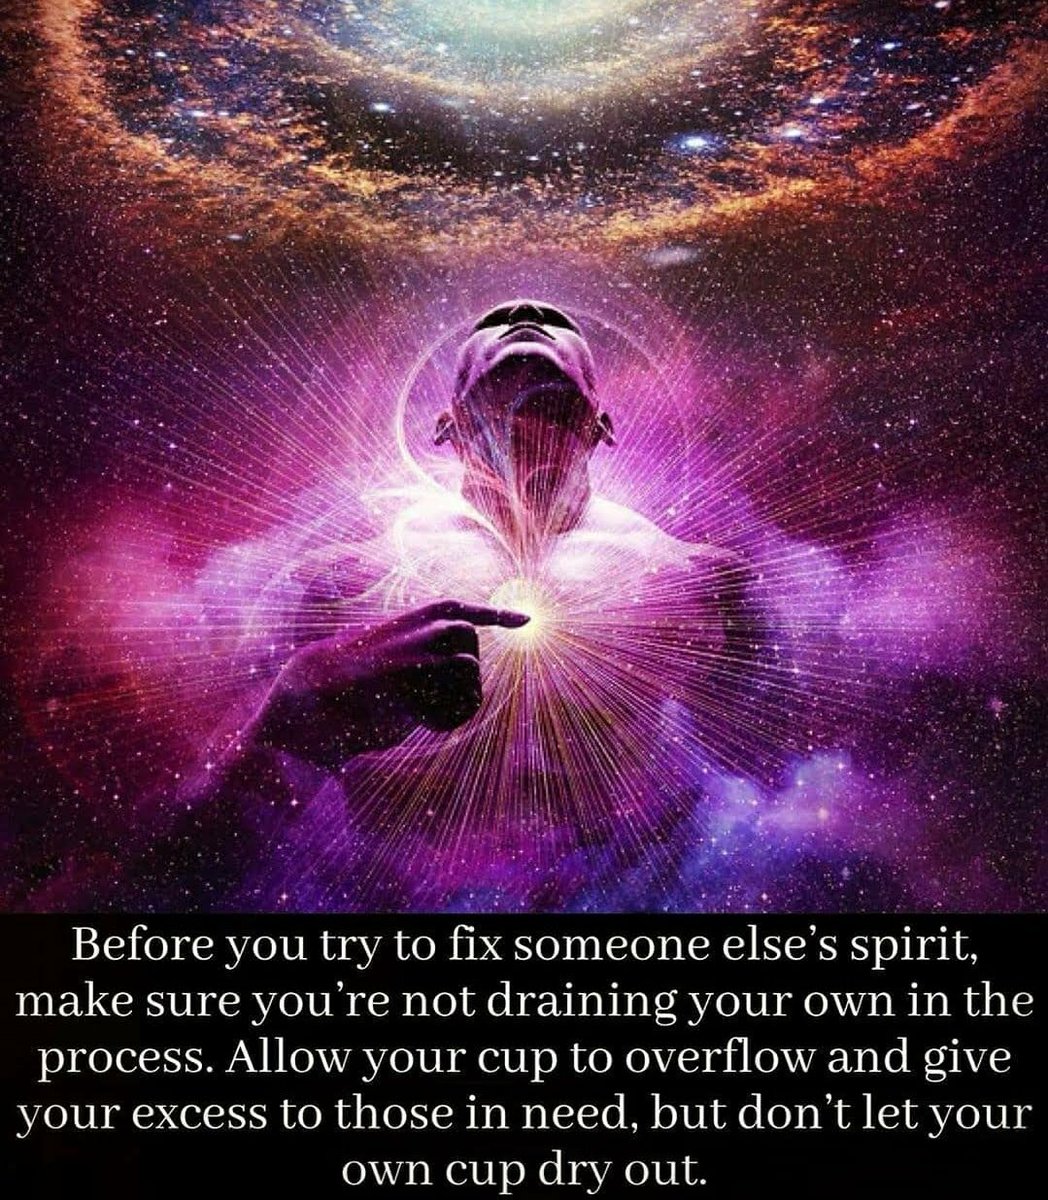 Before you try to fix someone else's spirit, make sure you're not draining your own in the process ✨️ 

Sincerely 
#Loveandlight